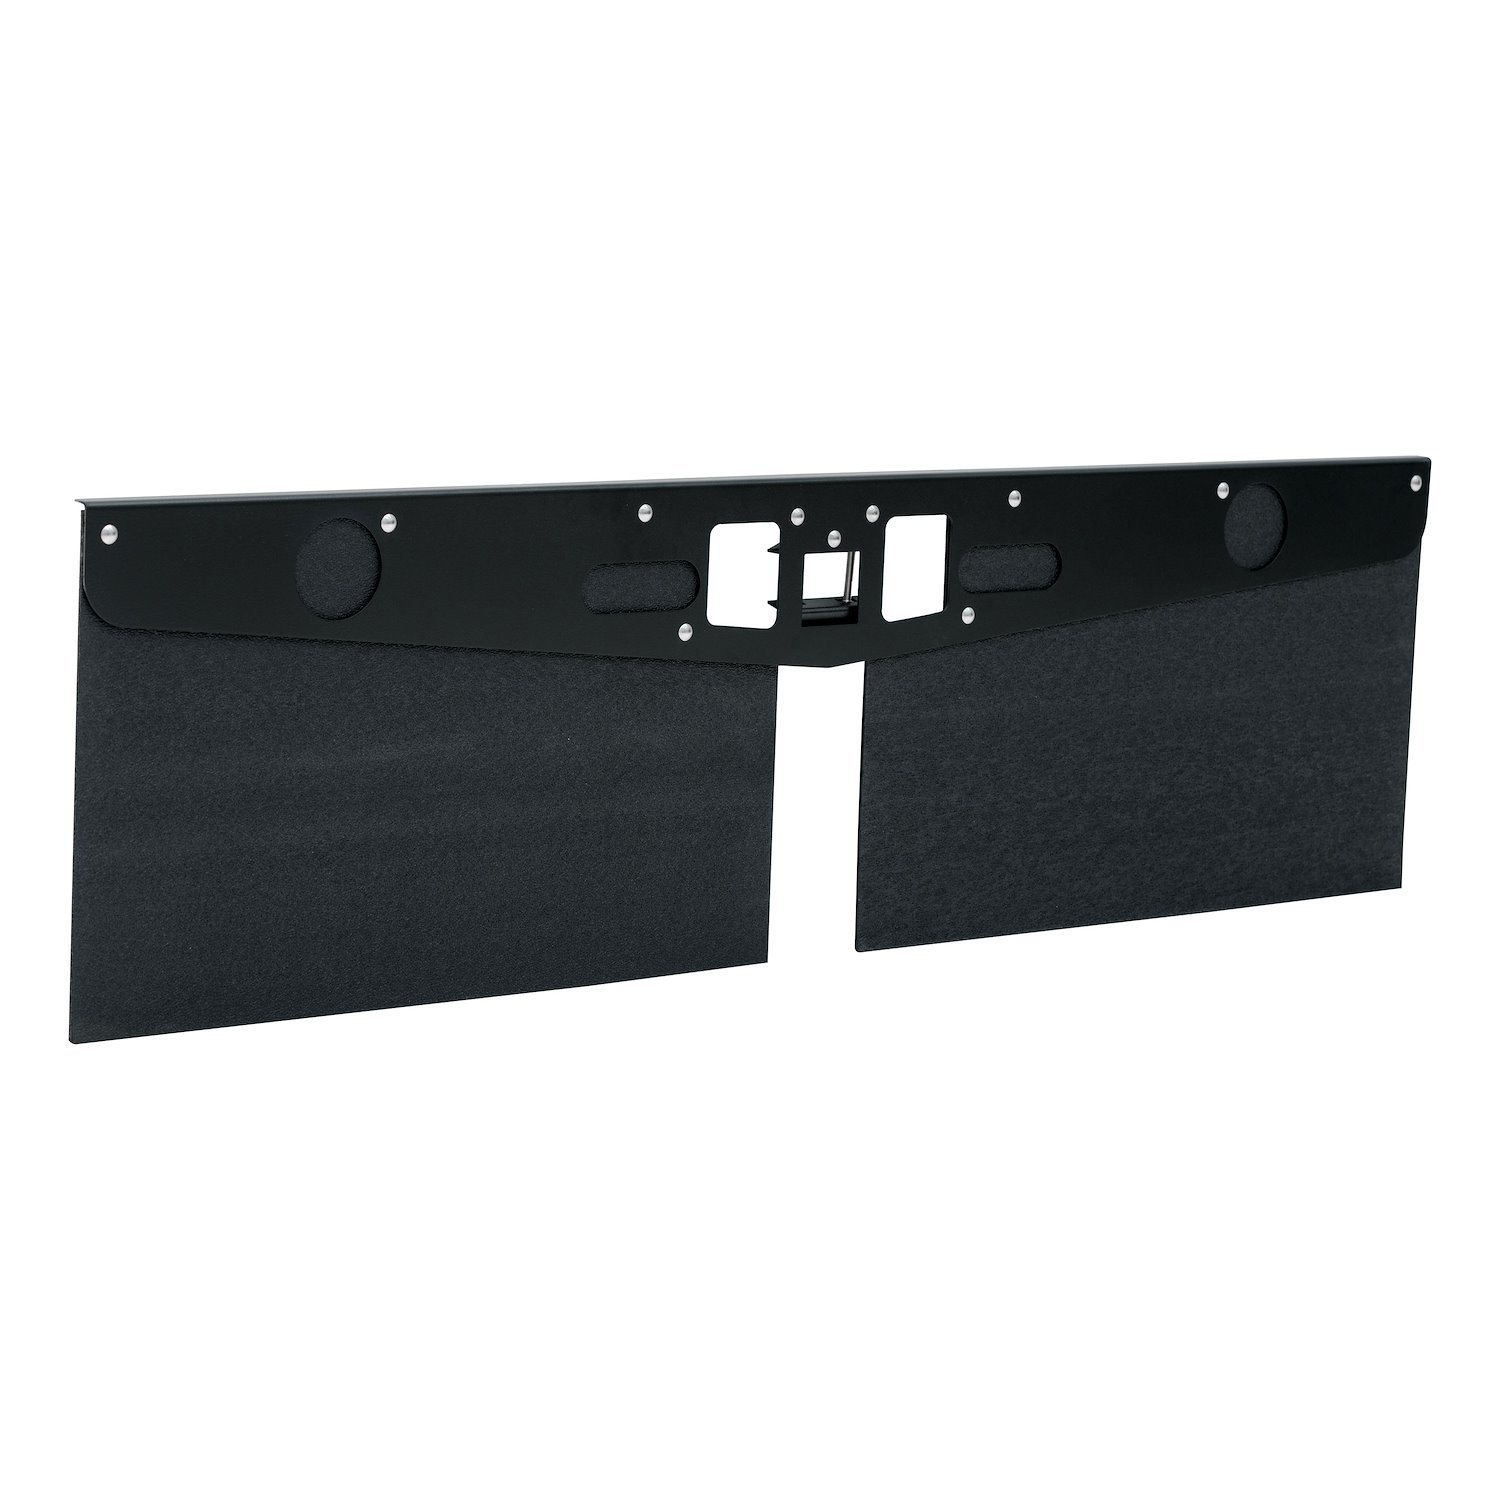 255300 20 in. Long Hitch-Mounted Textured Rubber Tow Guard Fits 2 in., 2-1/2 in. or 3 in. Shank)